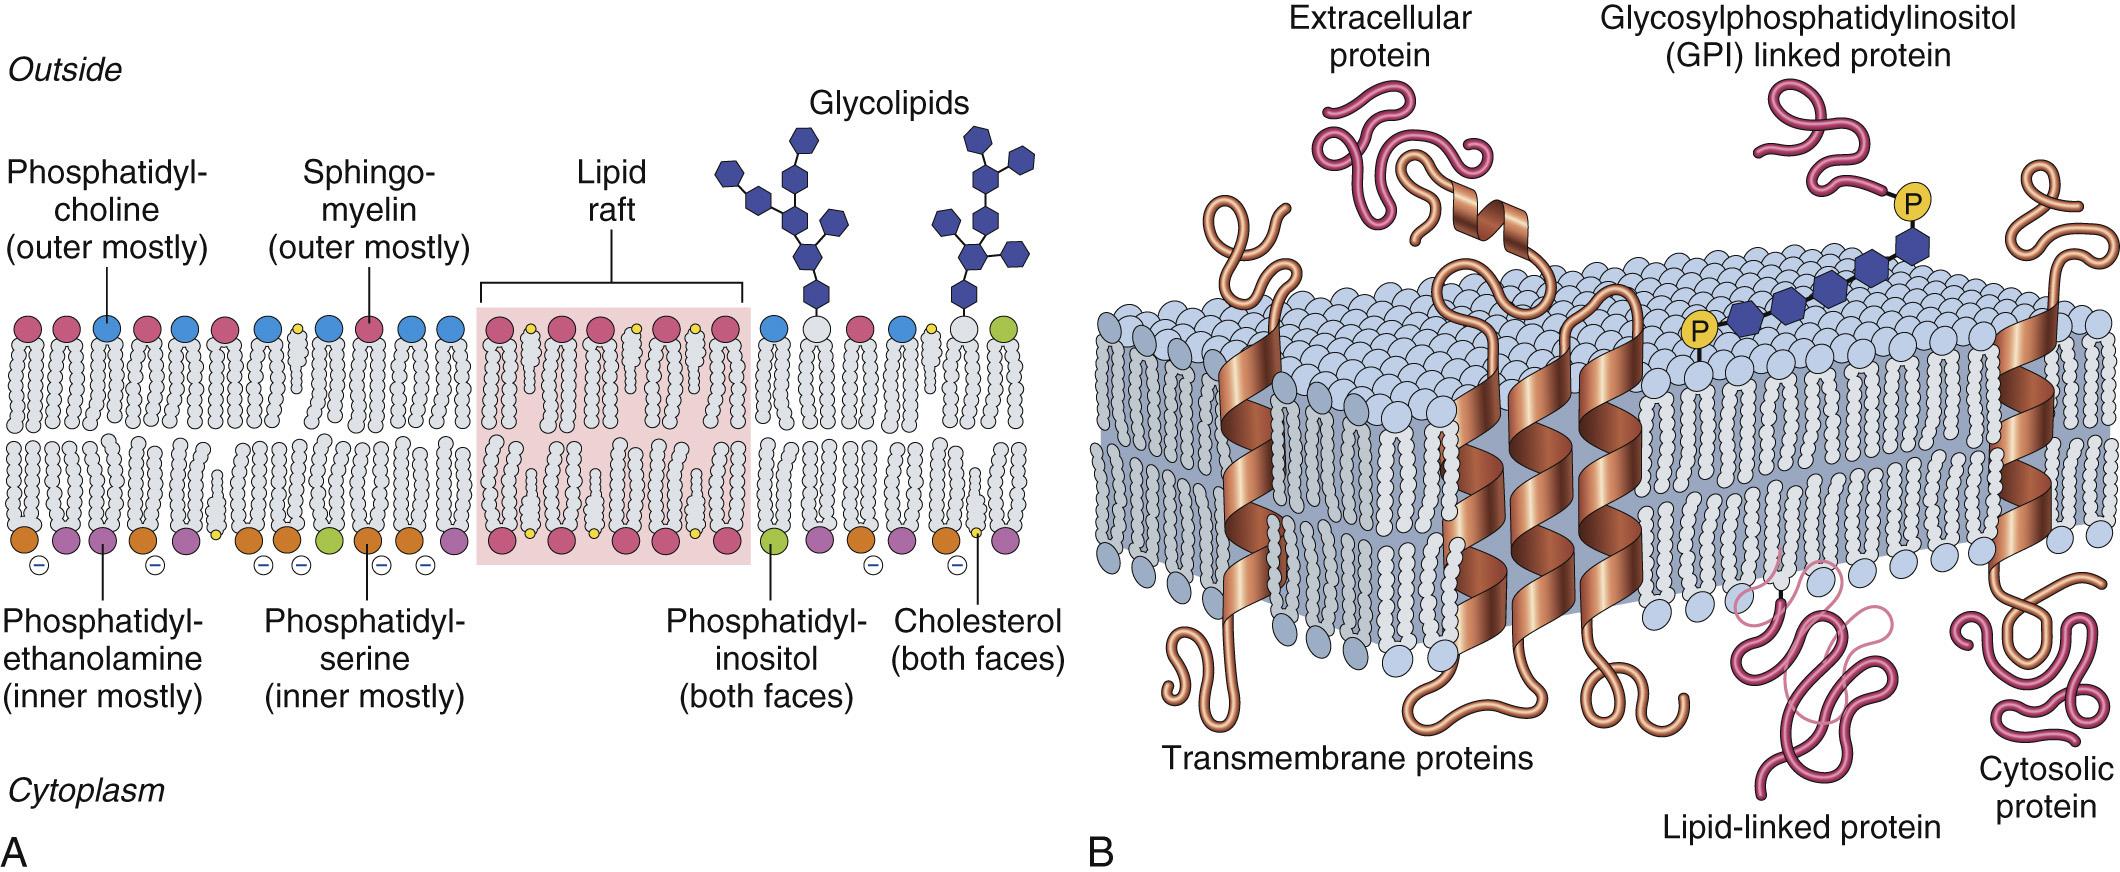 Figure 1.7, Plasma membrane organization and asymmetry. (A) The plasma membrane is a bilayer of phospholipids, cholesterol, and associated proteins. The phospholipid distribution within the membrane is asymmetric due to the activity of flippases; phosphatidylcholine and sphingomyelin are overrepresented in the outer leaflet, and phosphatidylserine (negative charge) and phosphatidylethanolamine are predominantly found on the inner leaflet; glycolipids occur only on the outer face where they contribute to the extracellular glycocalyx. Although the membrane is laterally fluid and the various constituents can diffuse randomly, specific domains, for example cholesterol and glycosphingolipid-rich lipid rafts, can also form. (B) Membrane-associated proteins may traverse the membrane (singly or multiply) via α-helical hydrophobic amino acid sequences; depending on the membrane lipid content and relative hydrophobicity of protein domains, such proteins may have nonrandom distributions within the membrane. Proteins on the cytosolic face can be associated with the plasma membrane through posttranslational modifications (e.g., farnesylation) or addition of palmitic acid. Proteins on the extracytoplasmic face can associate with the membrane via glycosylphosphatidylinositol (GPI) linkages. Besides protein-protein interactions within the membrane, membrane proteins can also associate with extracellular and/or intracytoplasmic proteins to generate distinct domains (e.g., the focal adhesion complex ). Transmembrane proteins can translate mechanical forces (e.g., from the cytoskeleton or extracellular matrix), as well as chemical signals across the membrane.